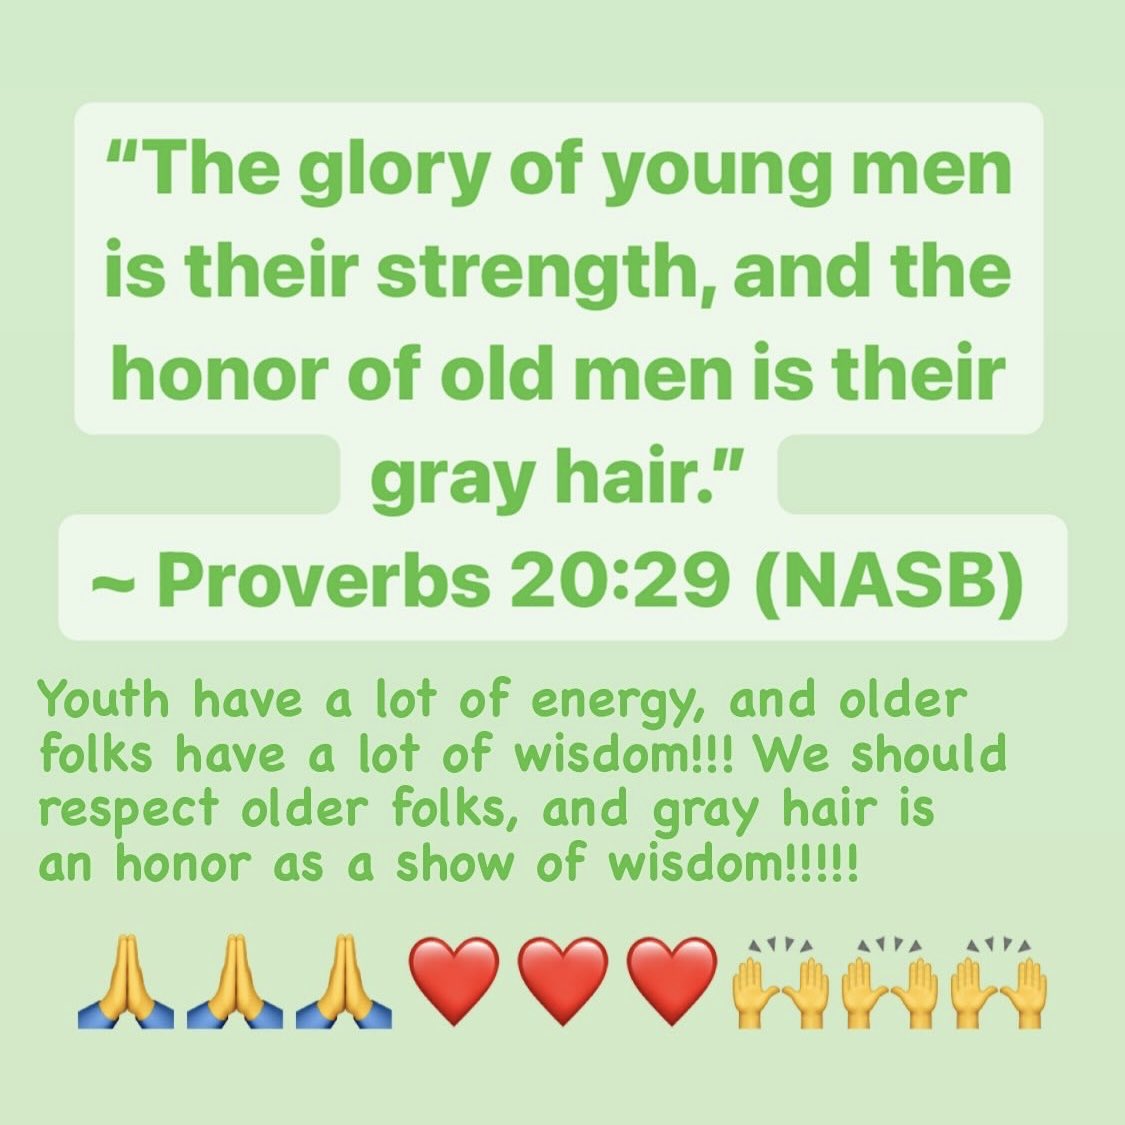 Youth have a lot of energy, and older folks have a lot of wisdom!!! We should respect older folks, and gray hair is an honor as a show of wisdom!!!!! 
🙏🙏🙏❤️❤️❤️🙌🙌🙌
#PraiseGod #PraiseTheLord #GodIsGood #Christian #LoveGod #LoveJesus #LoveEveryone #Love #FaithInGod +